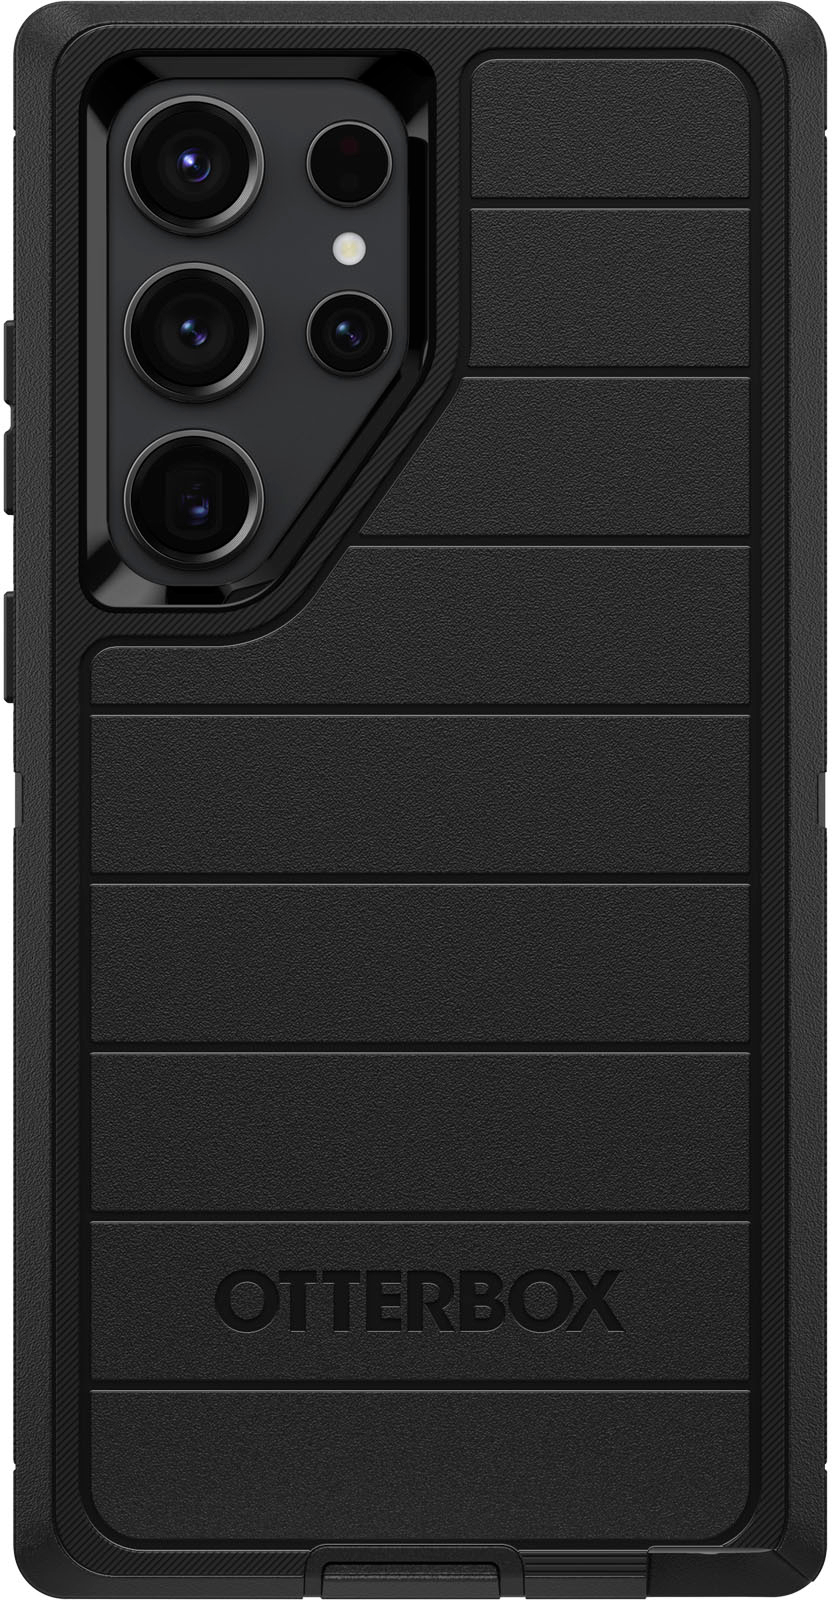 OtterBox Defender Series Pro Hard Shell for Samsung Galaxy S23 Ultra Black  77-91064 - Best Buy